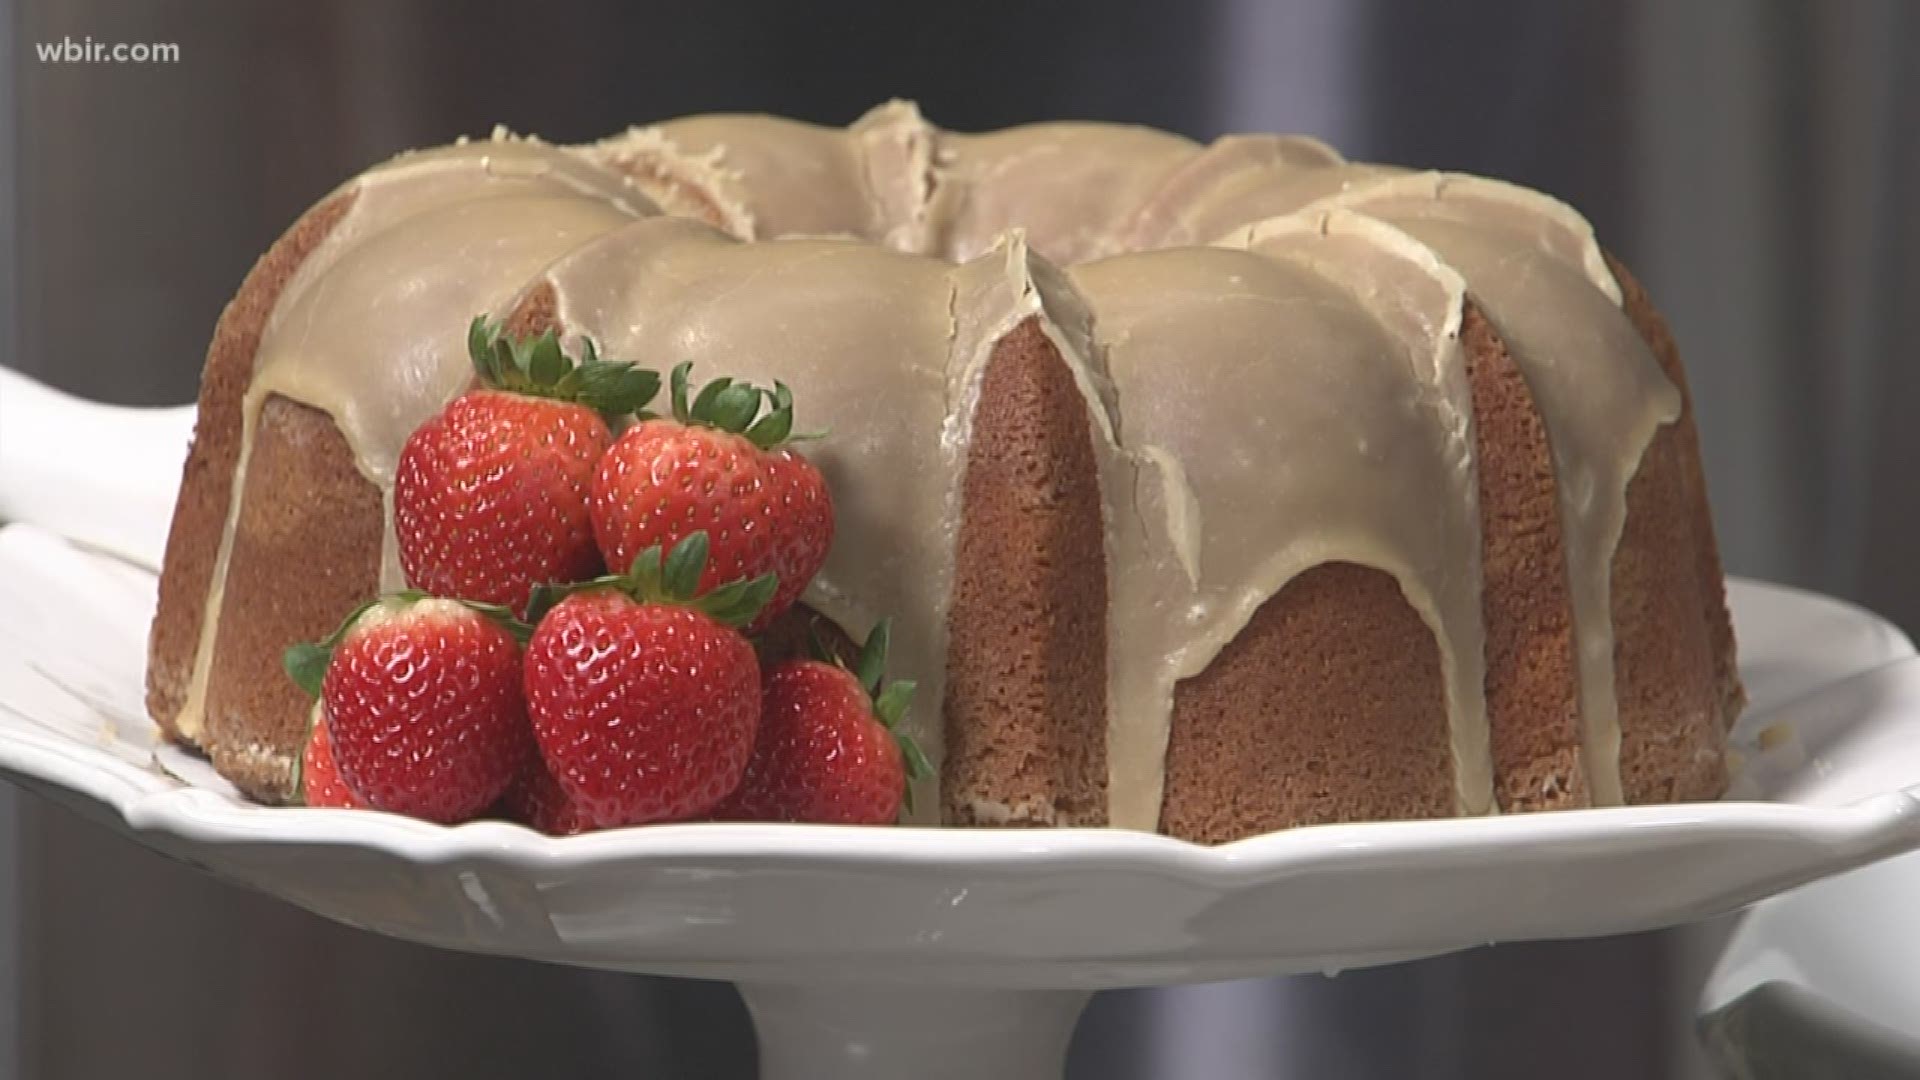 Betty Henry from B&G Catering is in the kitchen with us to show us how a Caramel Pound Cake is made!